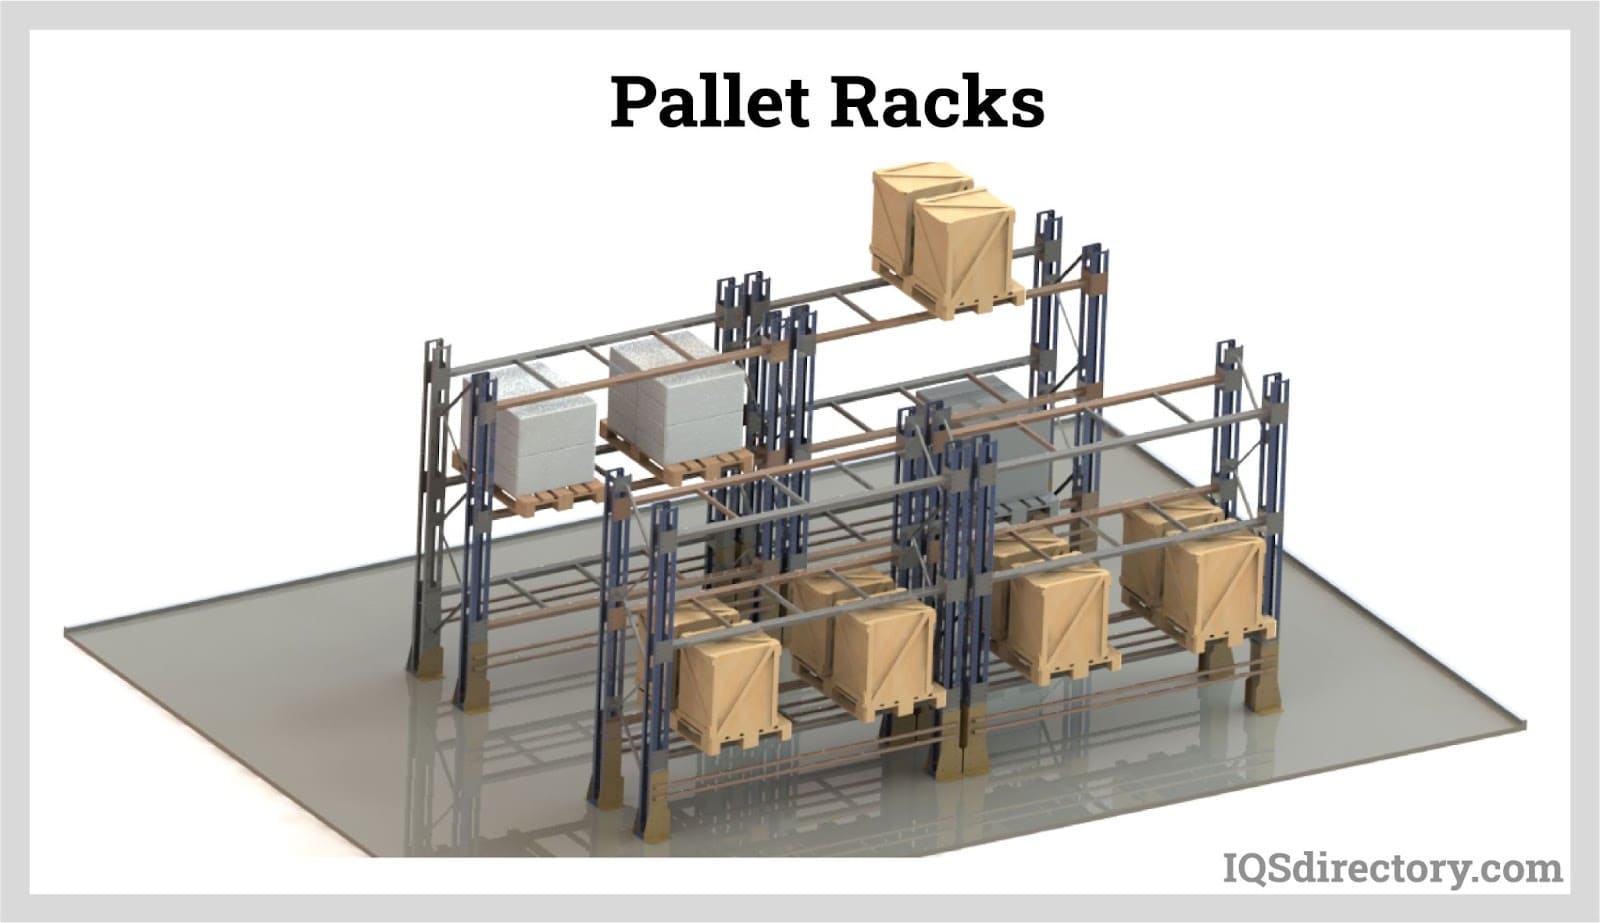 Storage Racks: Types, Applications, Advantages, and Design